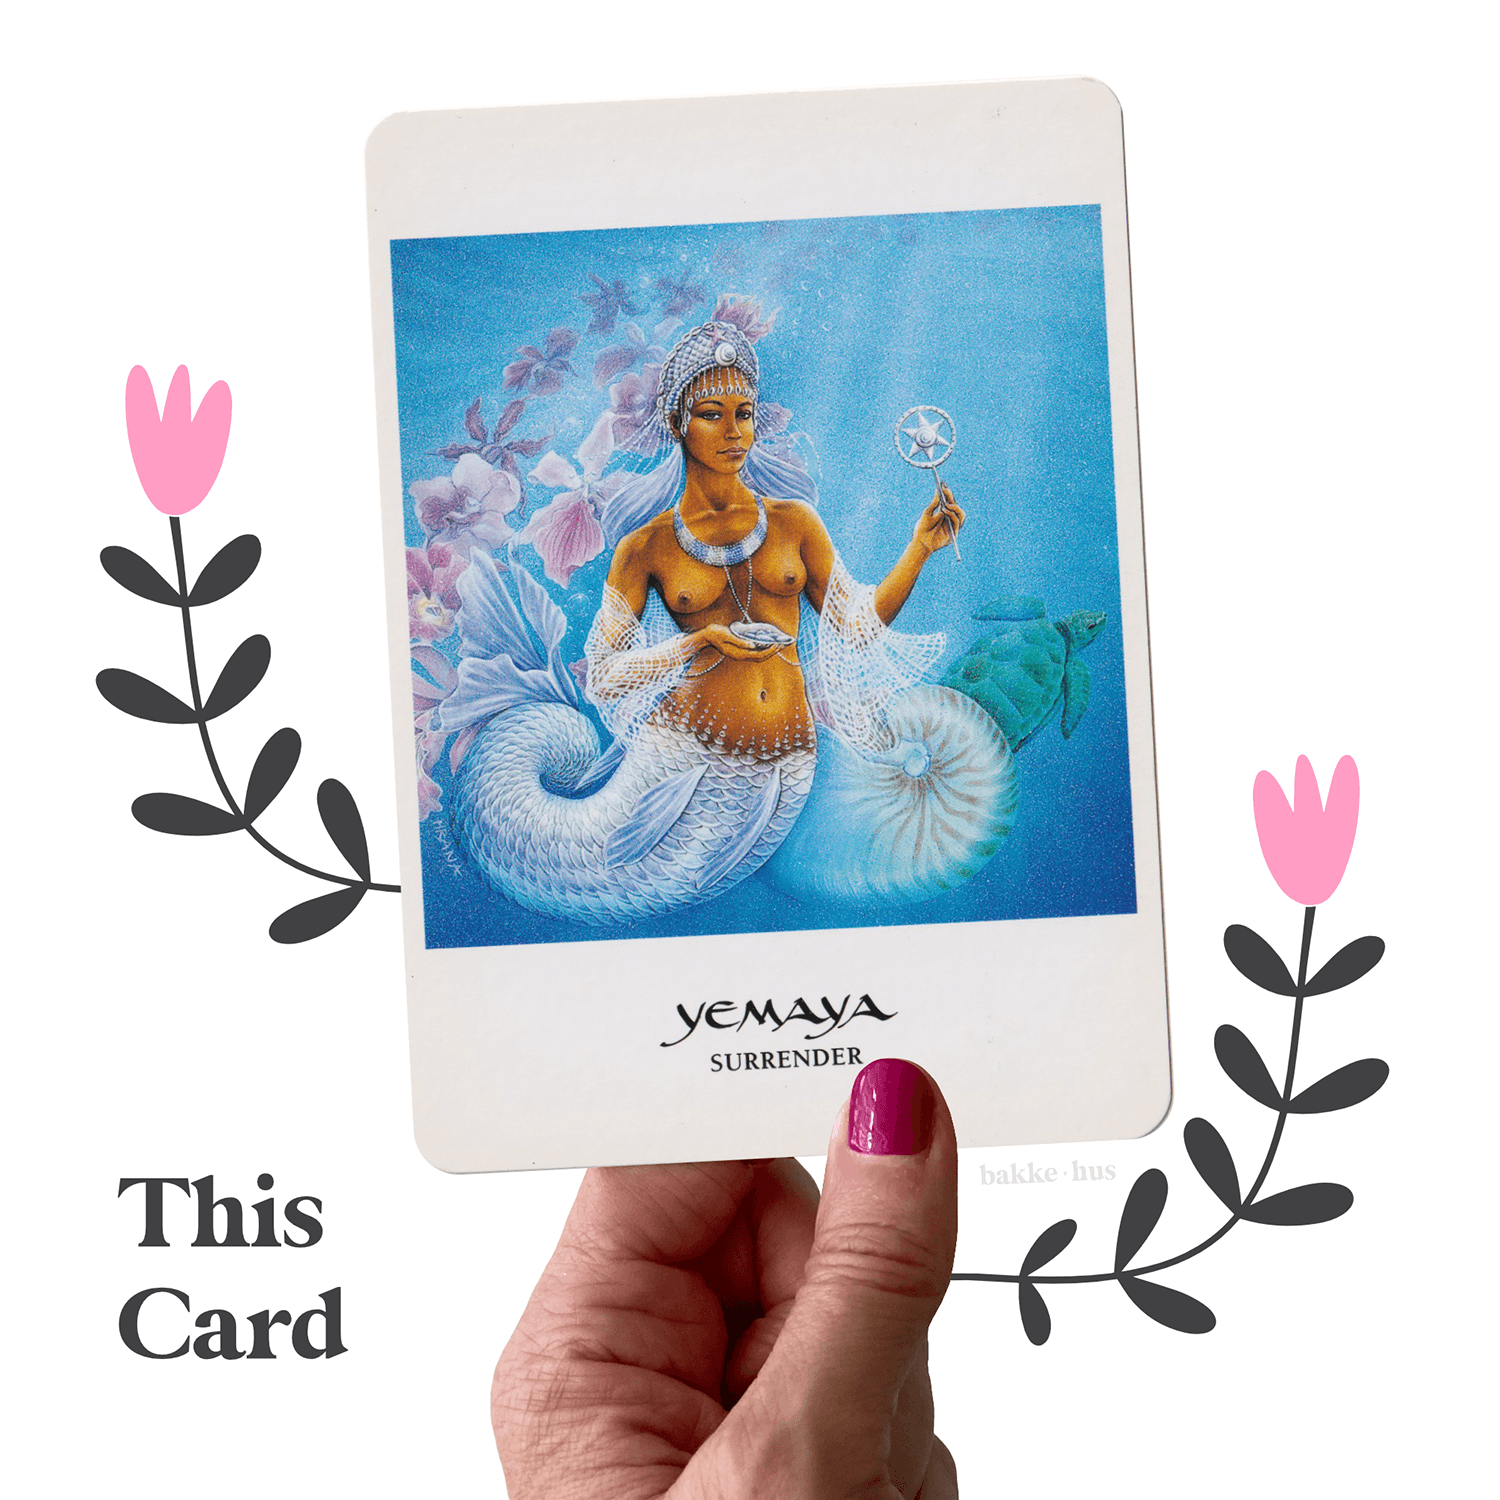 A female hand holding the Yemaya Oracle Cards from The Goddess Oracle deck by Amy Sophia Marashinsky. The image also contains two pink & black illustrated flowers and the words 'This Card" and bakkehus logo.